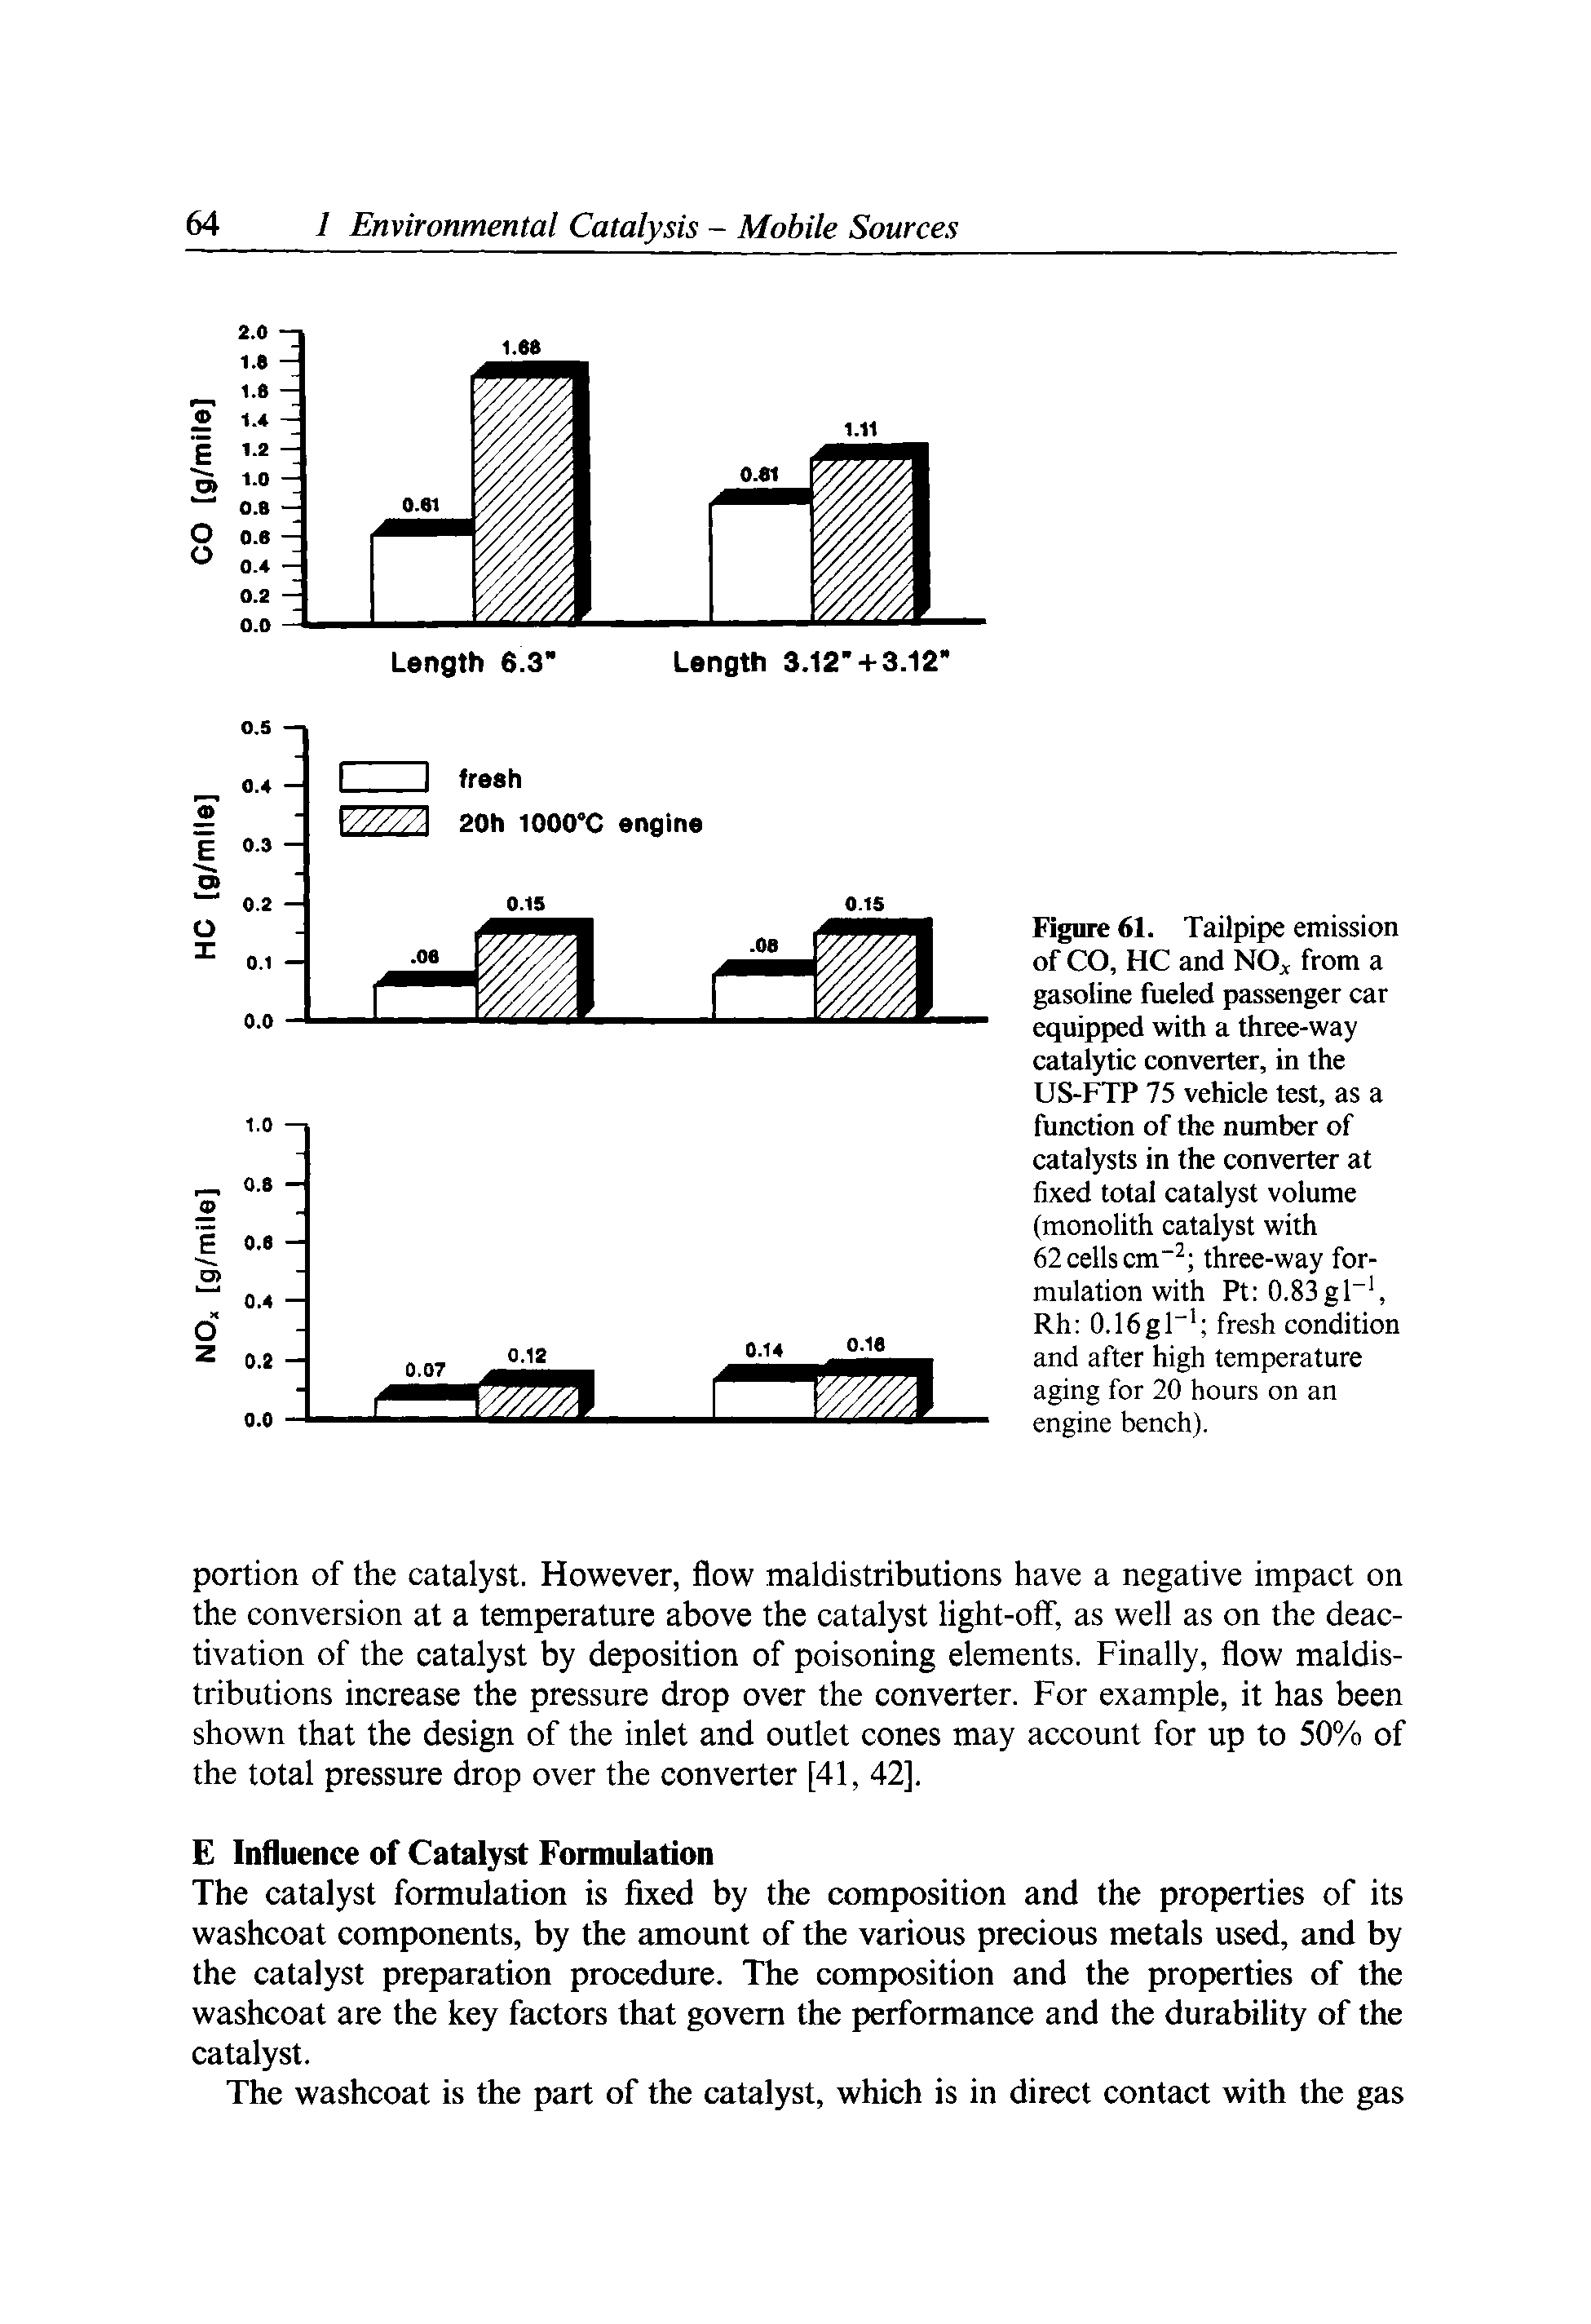 Figure 61. Tailpipe emission of CO, HC and NO c from a gasoline fueled passenger car equipped with a three-way catalytic converter, in the US-FTP 75 vehicle test, as a function of the number of catalysts in the converter at fixed total catalyst volume (monolith catalyst with 62 cells cm three-way formulation with Pt 0.83gl , Rh 0.16gl fresh condition and after high temperature aging for 20 hours on an engine bench).